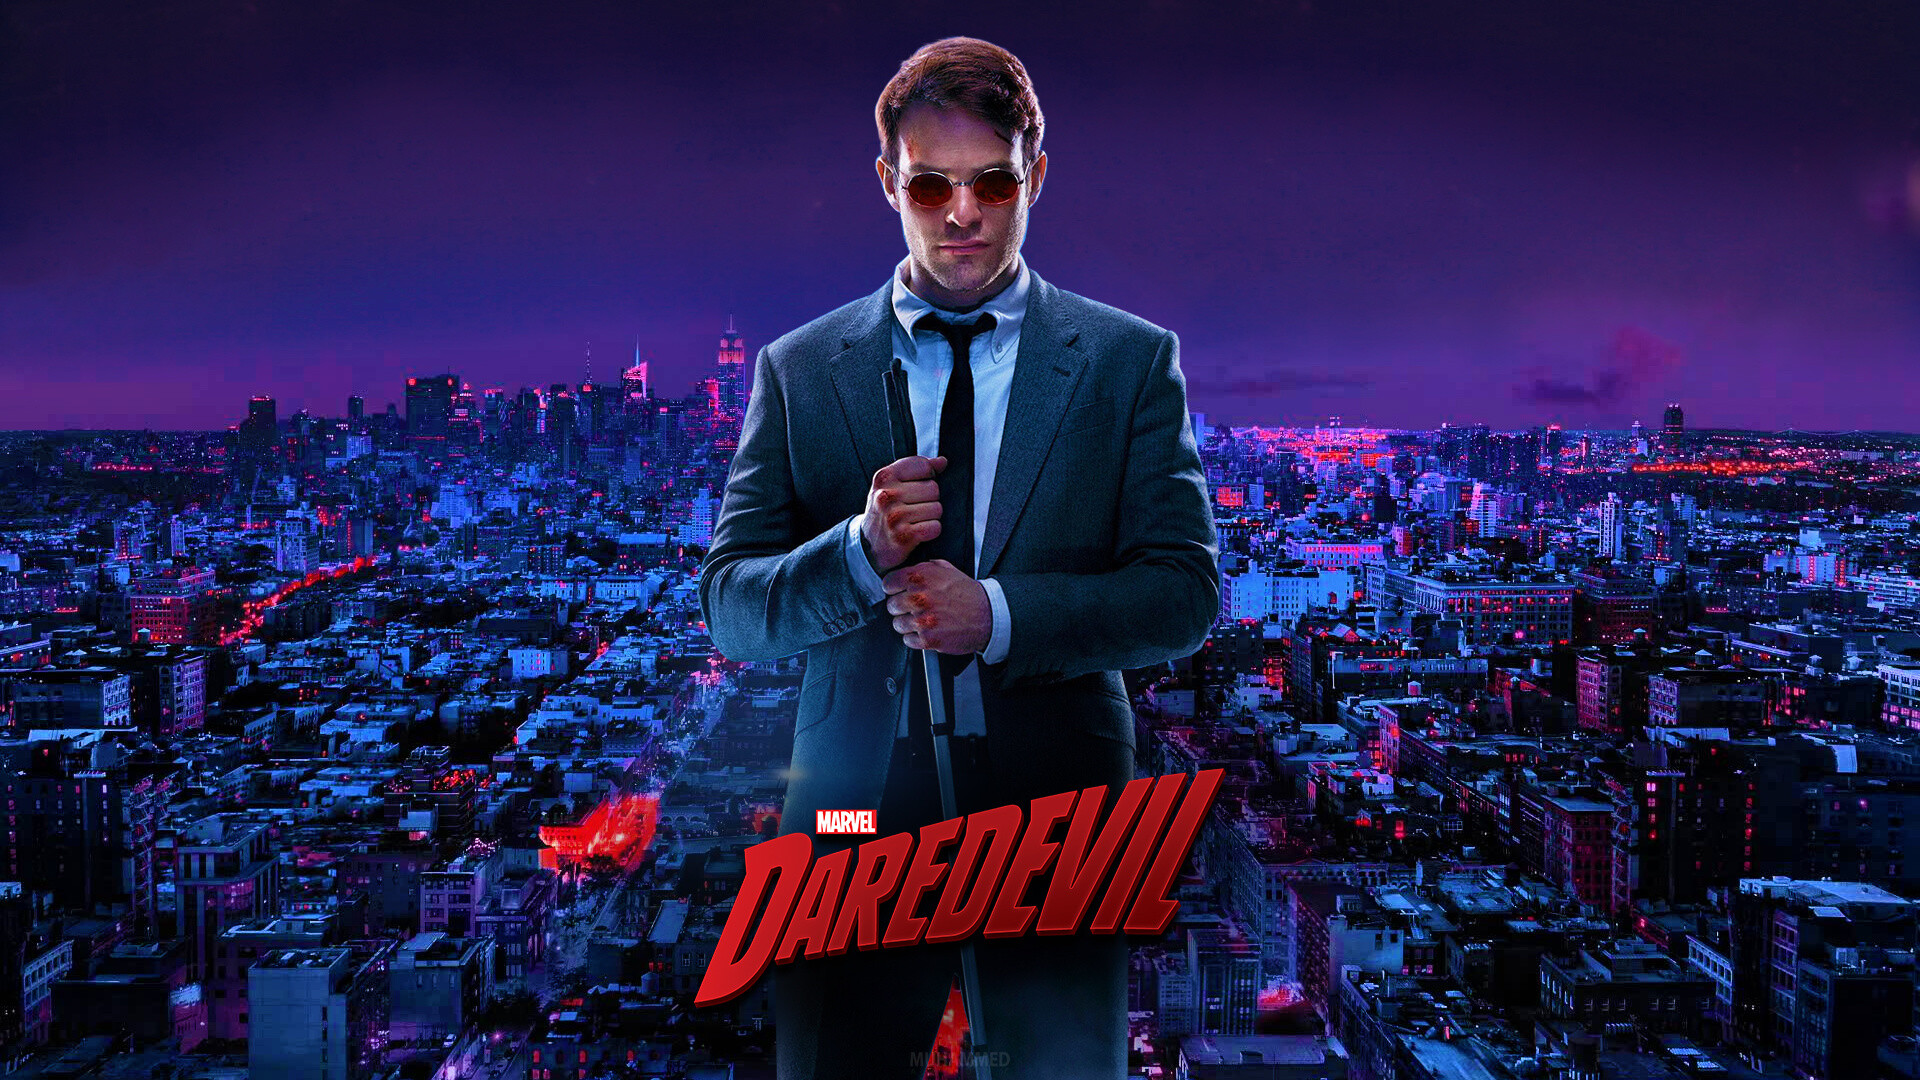 Daredevil (TV Series): Charlie Cox stars as Matt Murdock, a blind lawyer-by-day who fights crime as a masked vigilante by night. 1920x1080 Full HD Background.